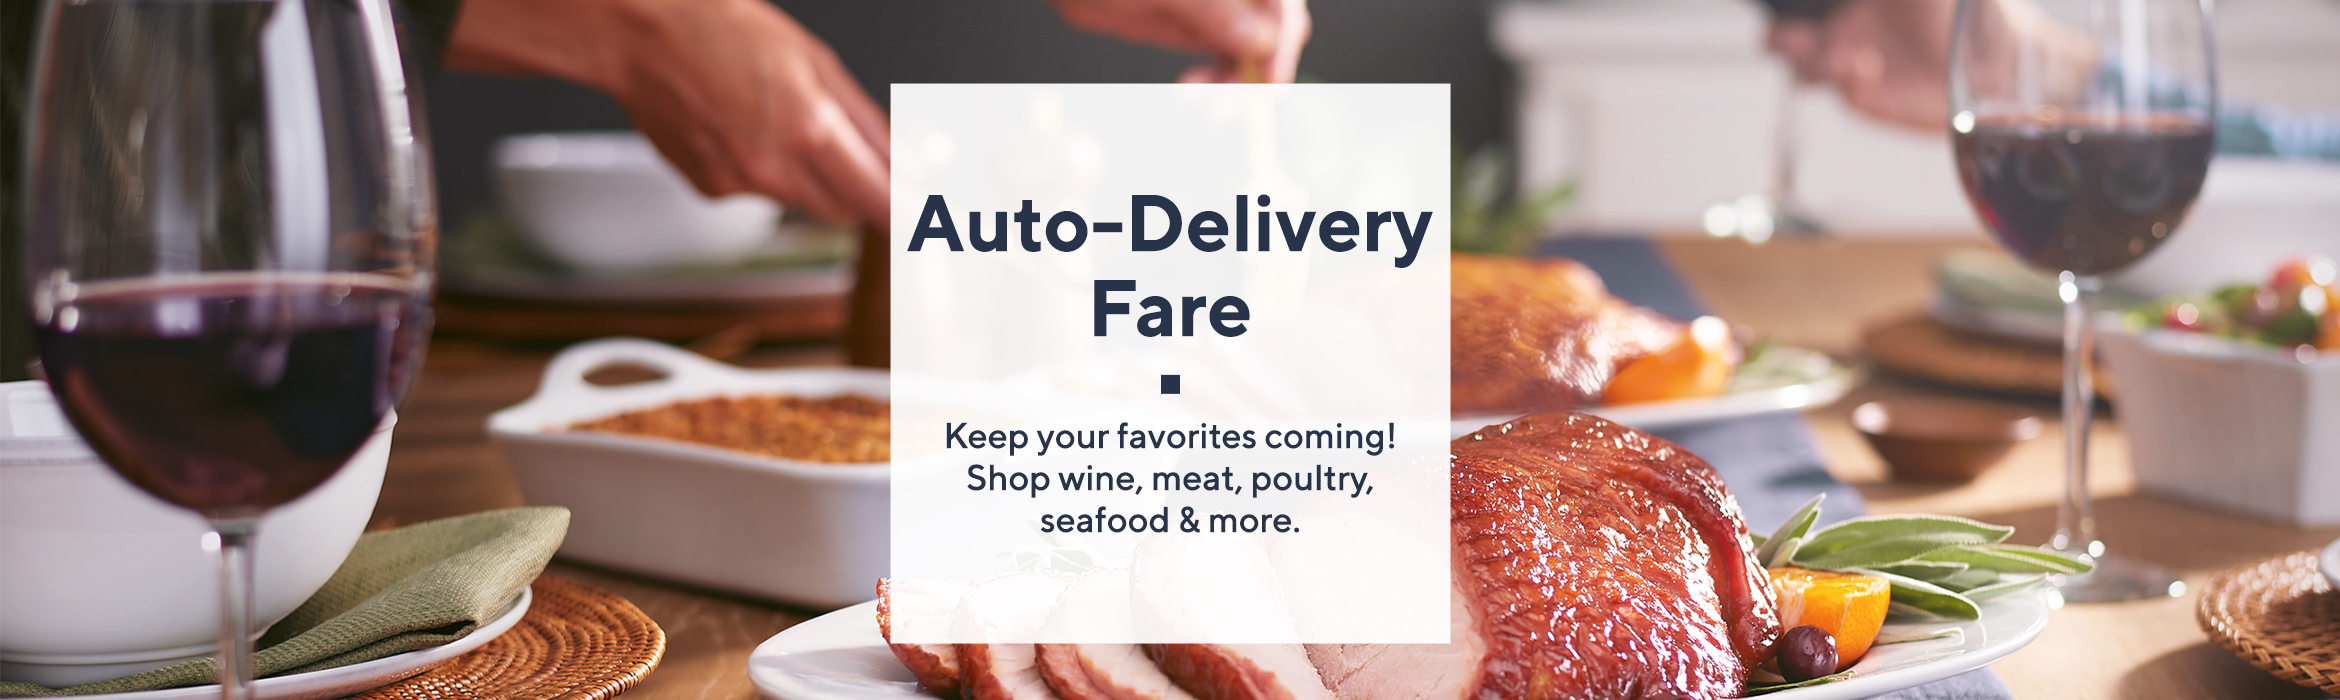 Auto-Delivery Fare   Keep your favorites coming! Shop wine, meat, poultry, seafood & more. 